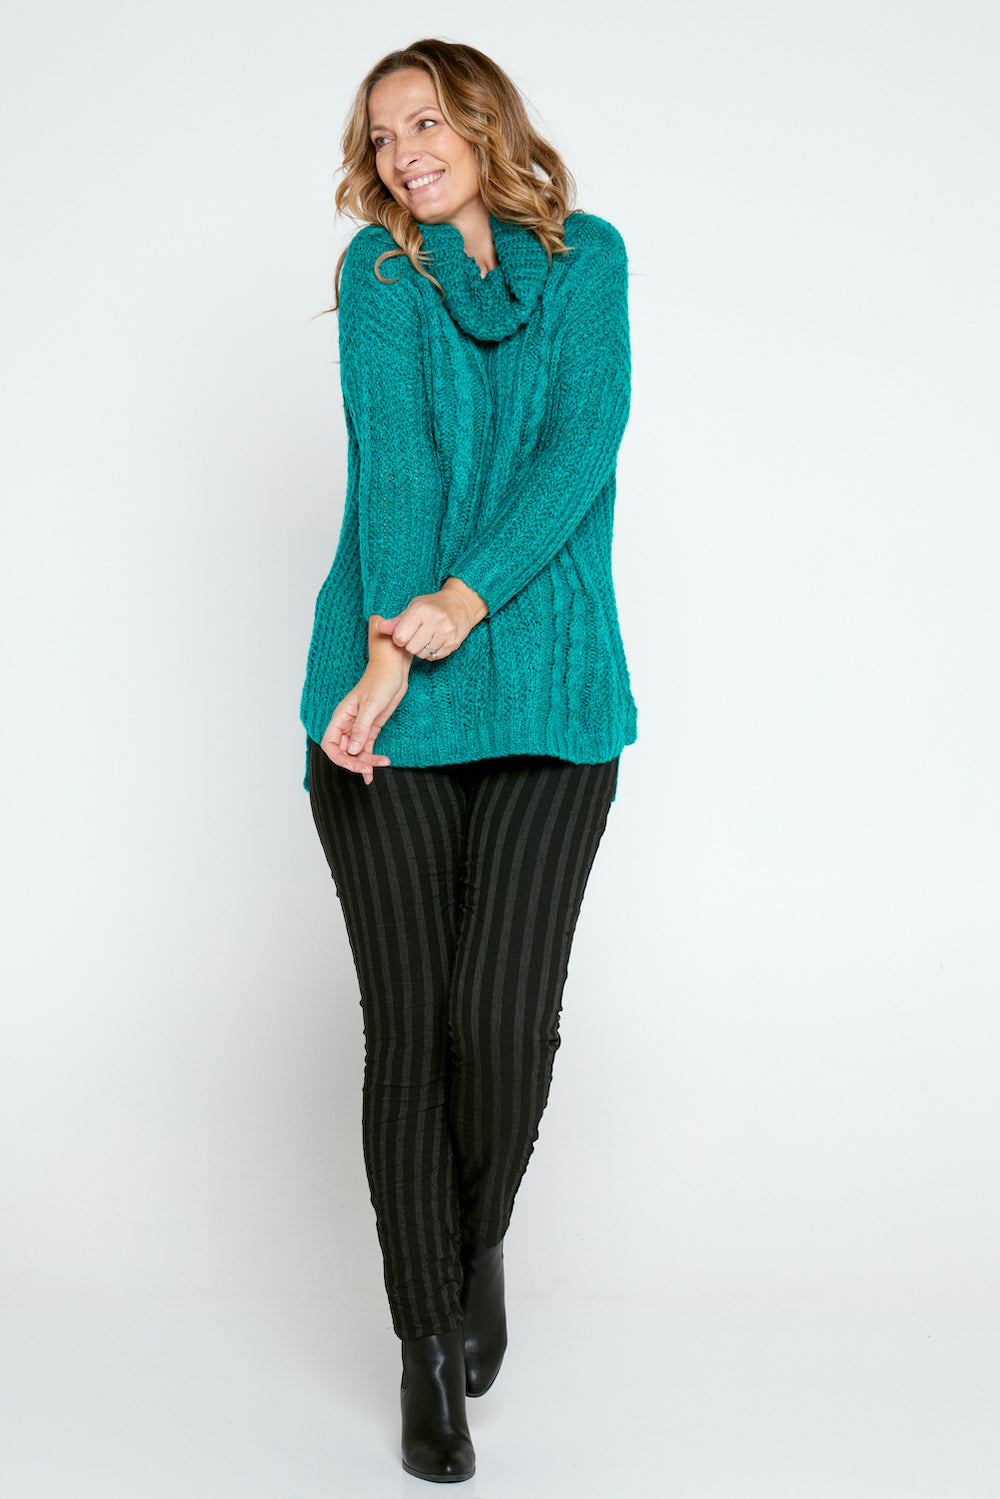 Kim Cable Cowl Knit - Teal